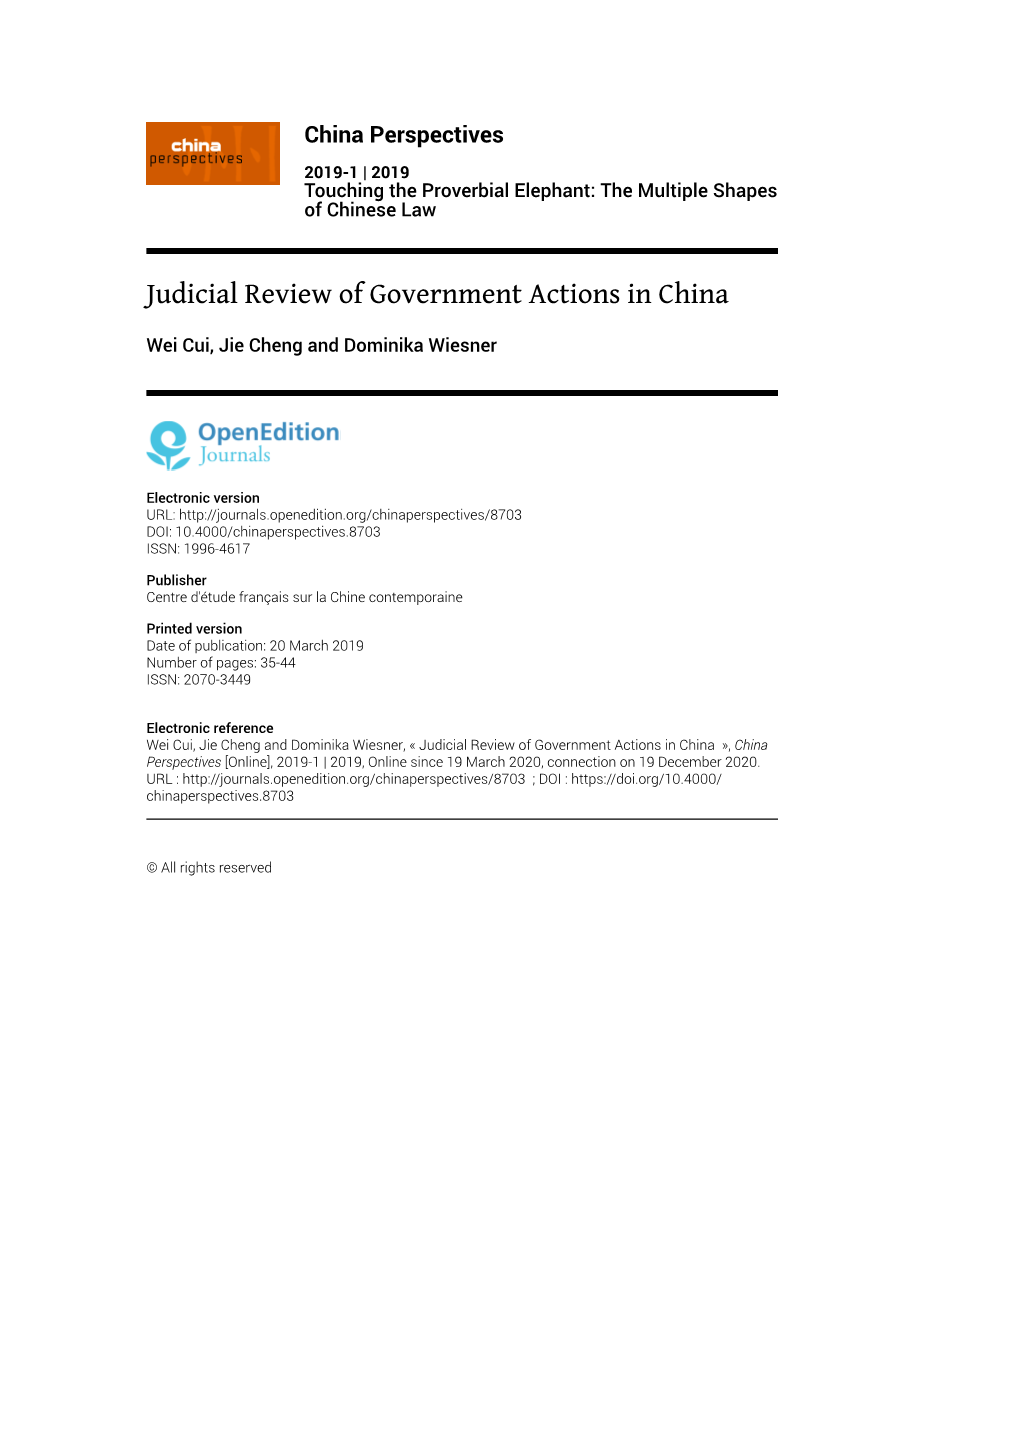 Judicial Review of Government Actions in China